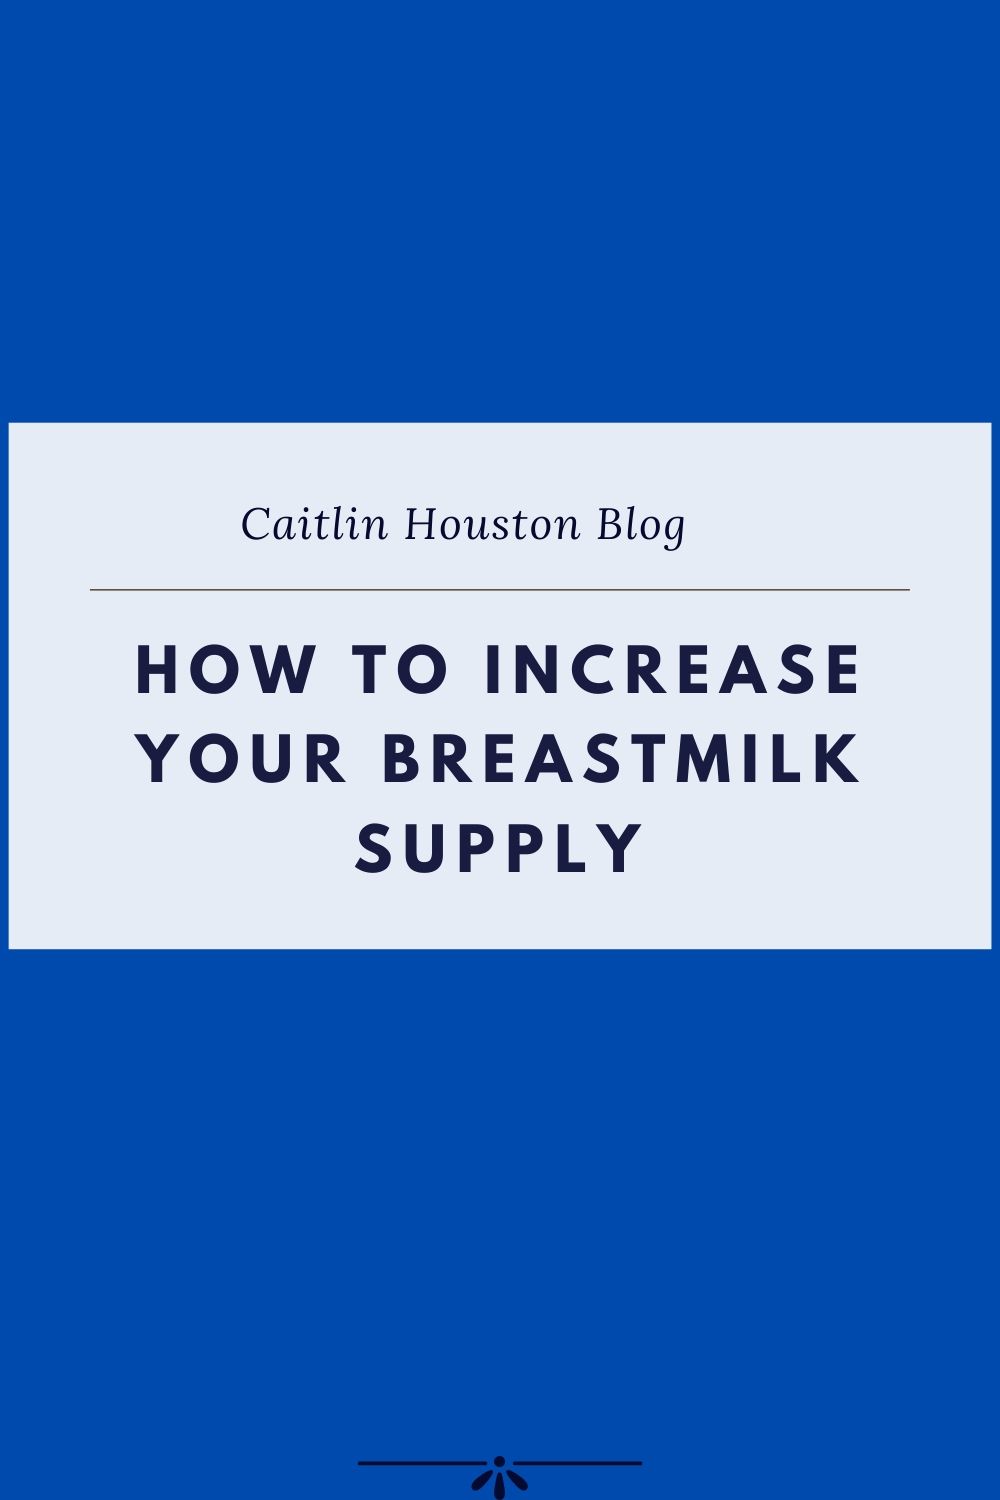 Ways to Increase your Breastmilk Supply